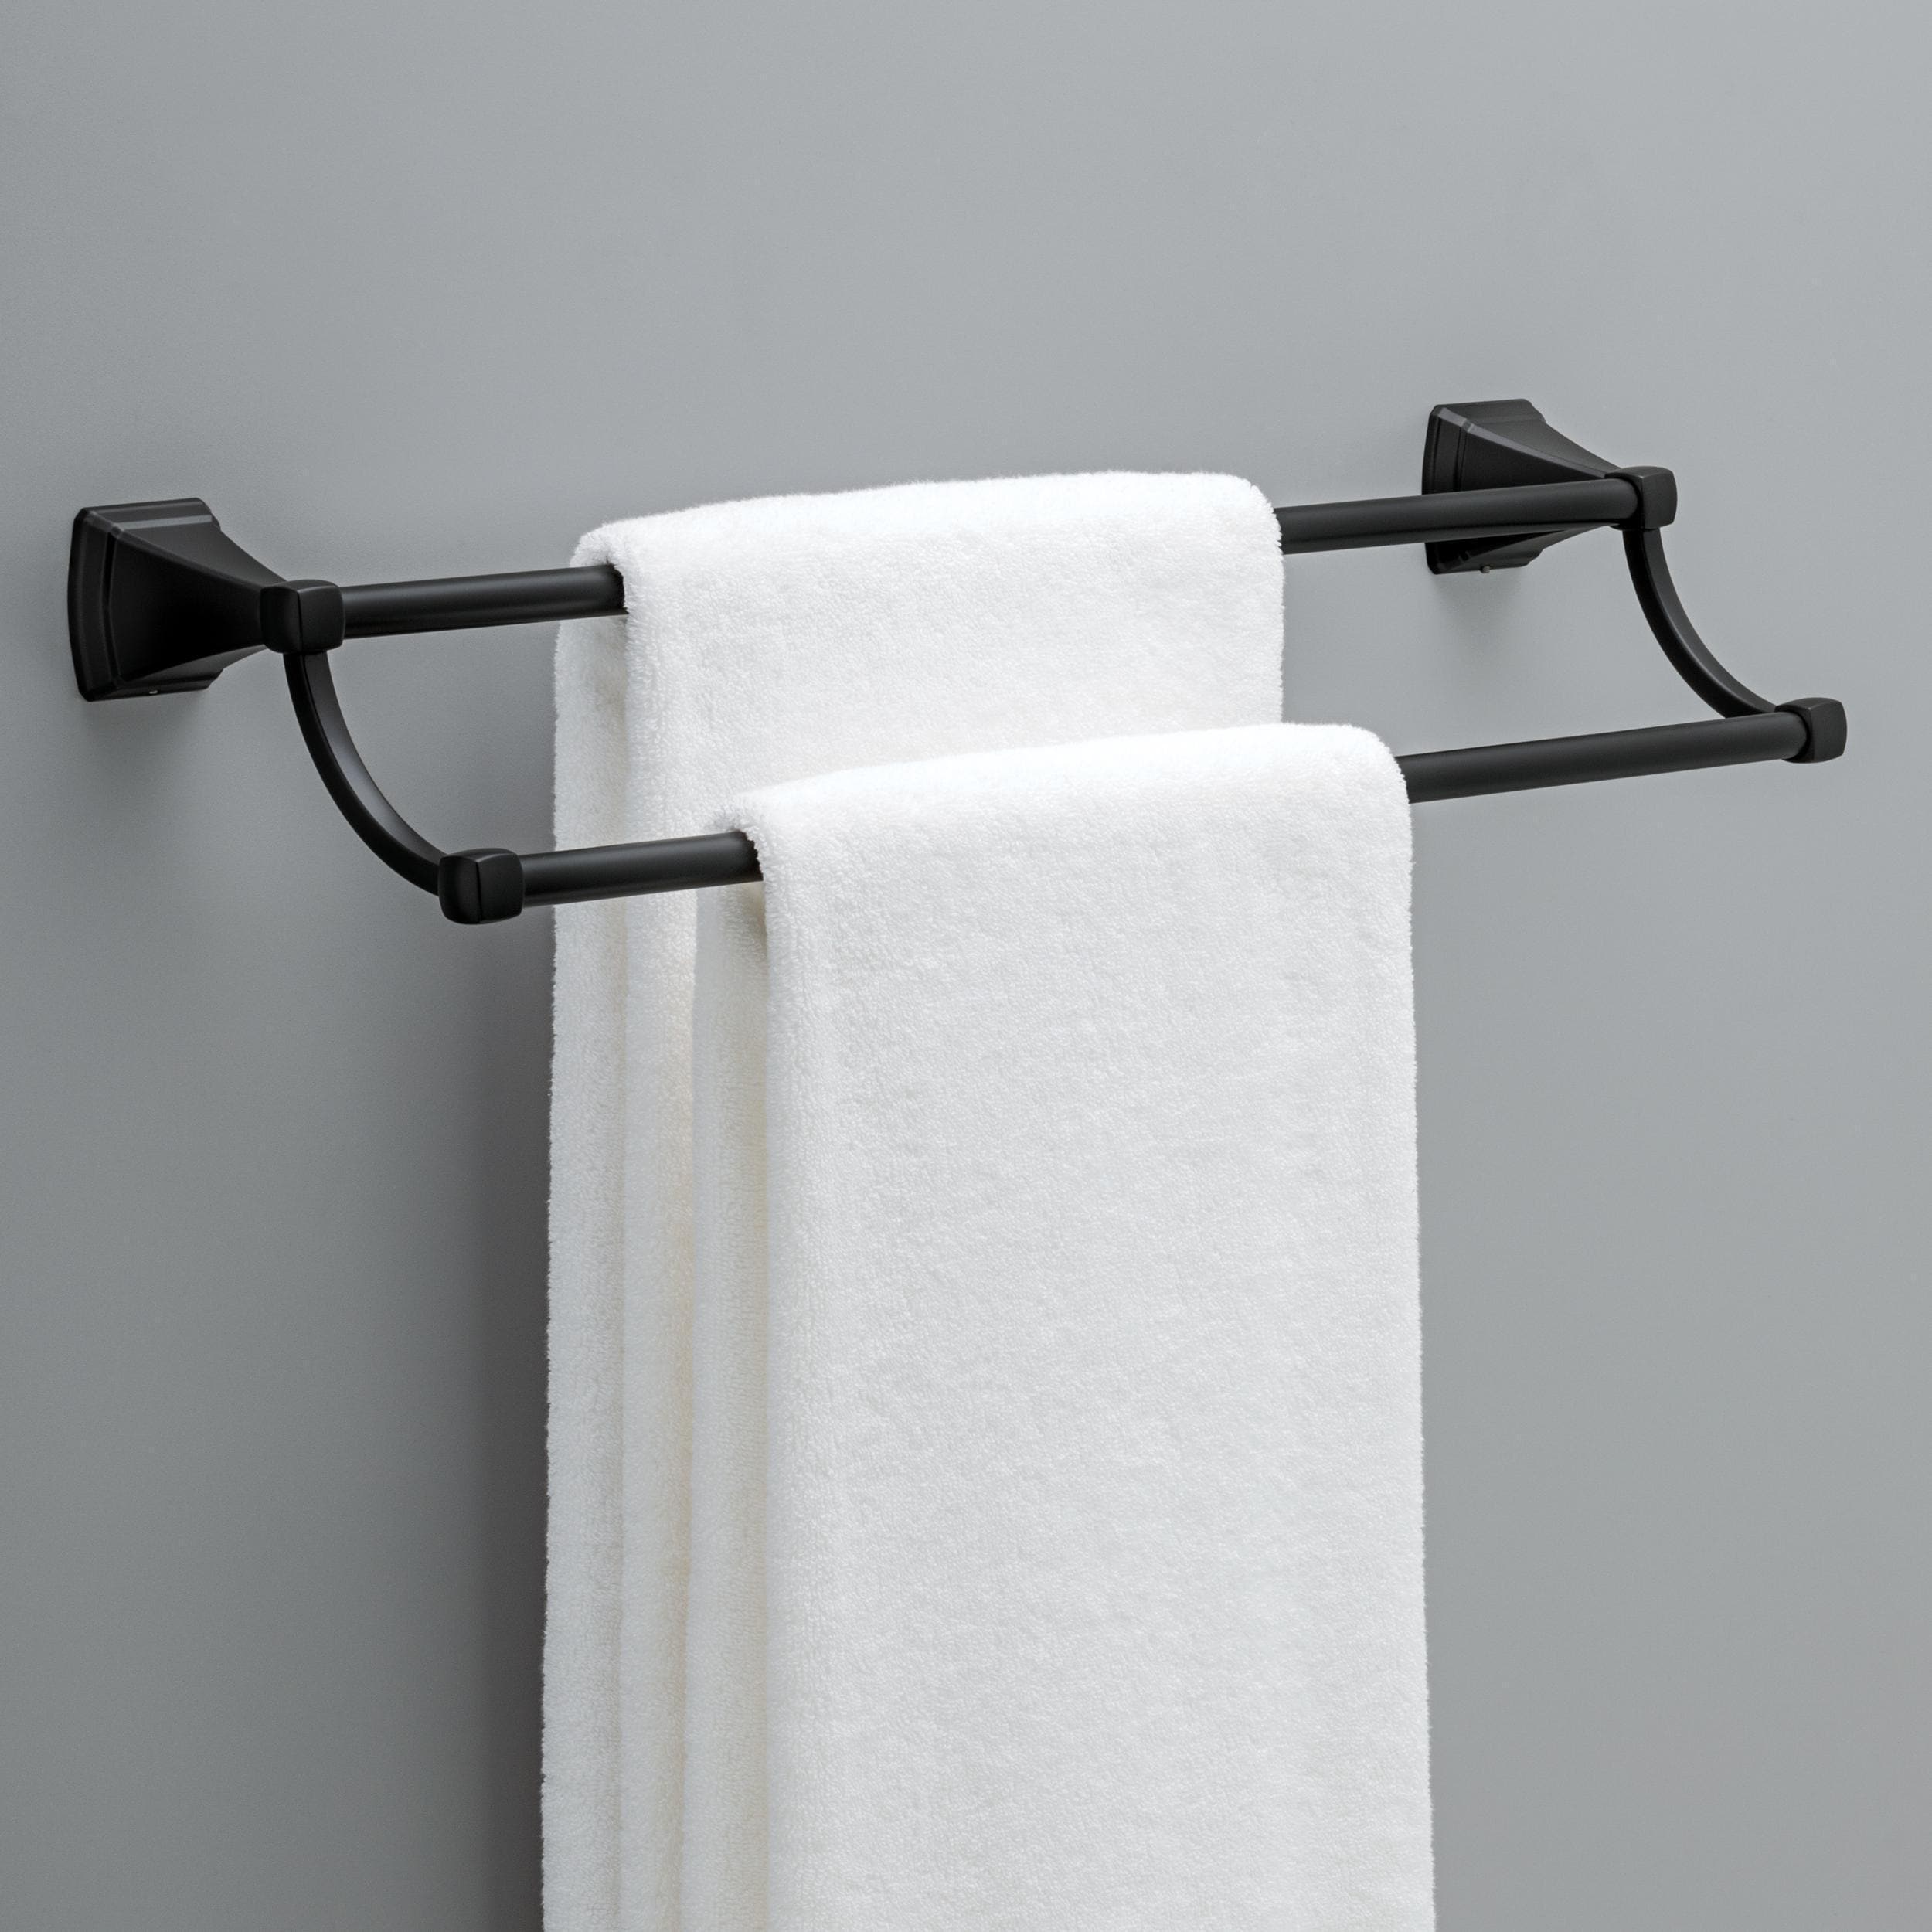 Double Towel Bar 23.6 Inch - Matte Black Stainless Steel (OD80611B)